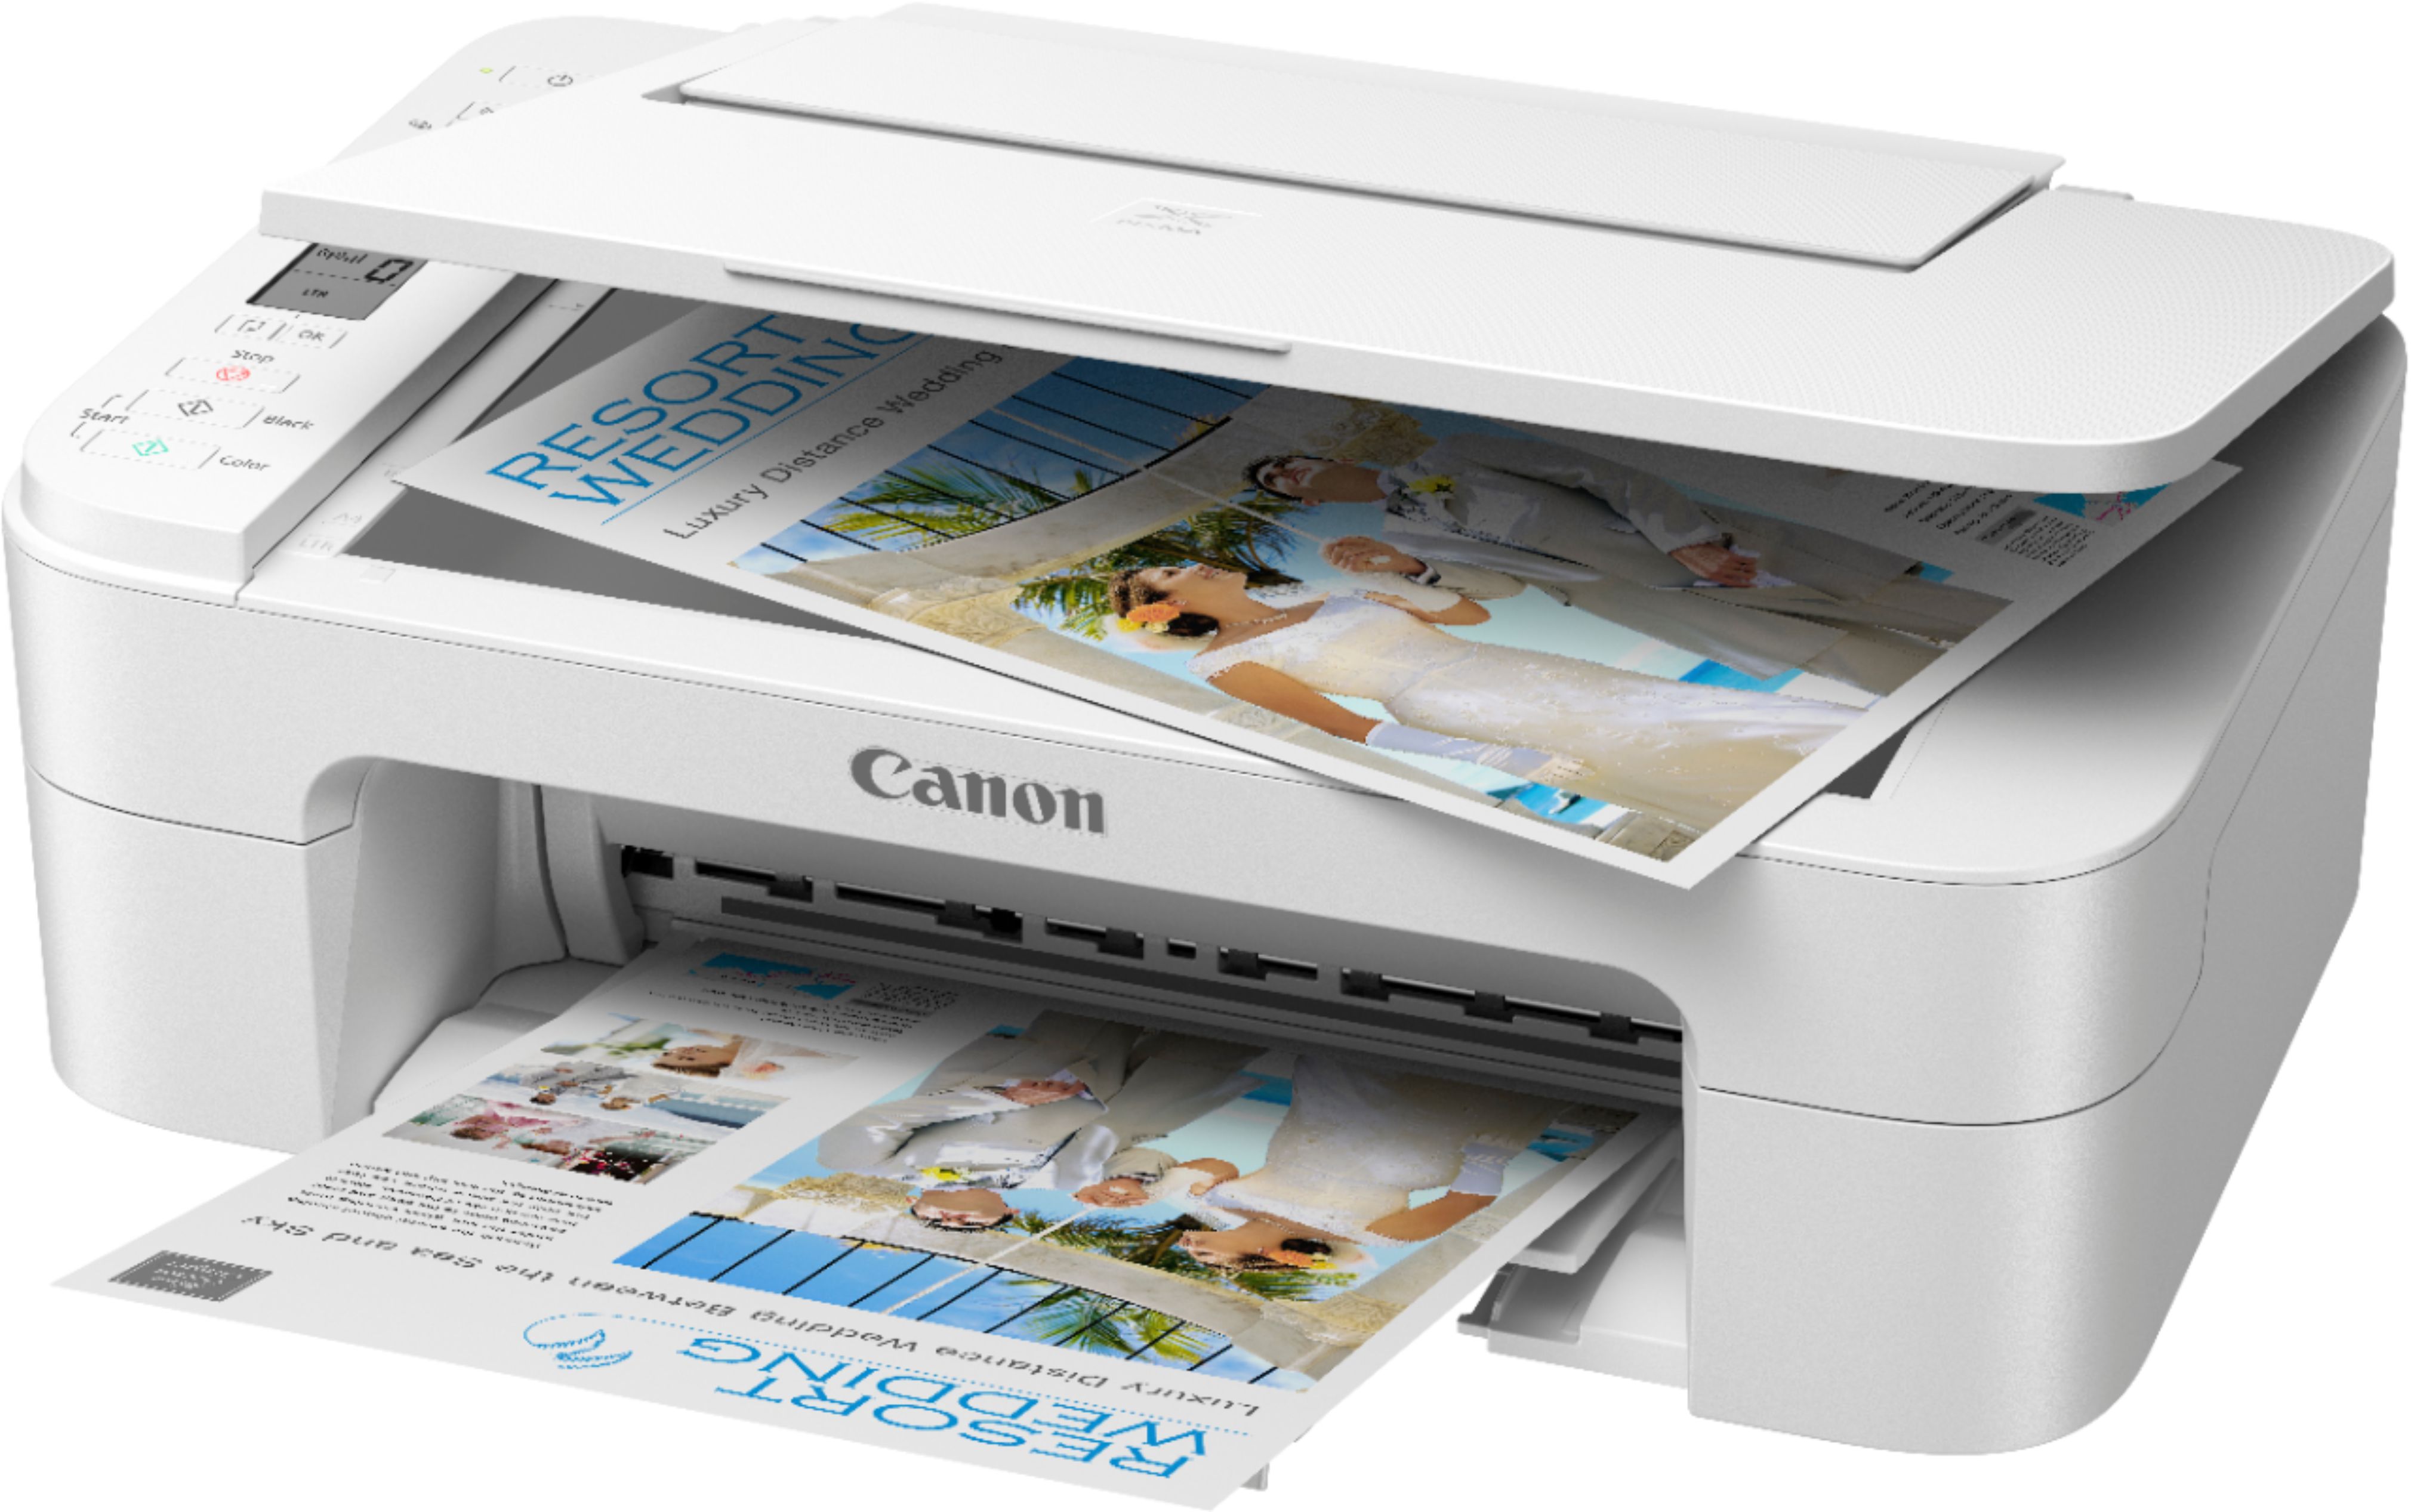 CANON PIXMA TS3350 ALL- IN - ONE PRINTER WHAT IS IN THE BOX LET US UNBOX &  FIND OUT 